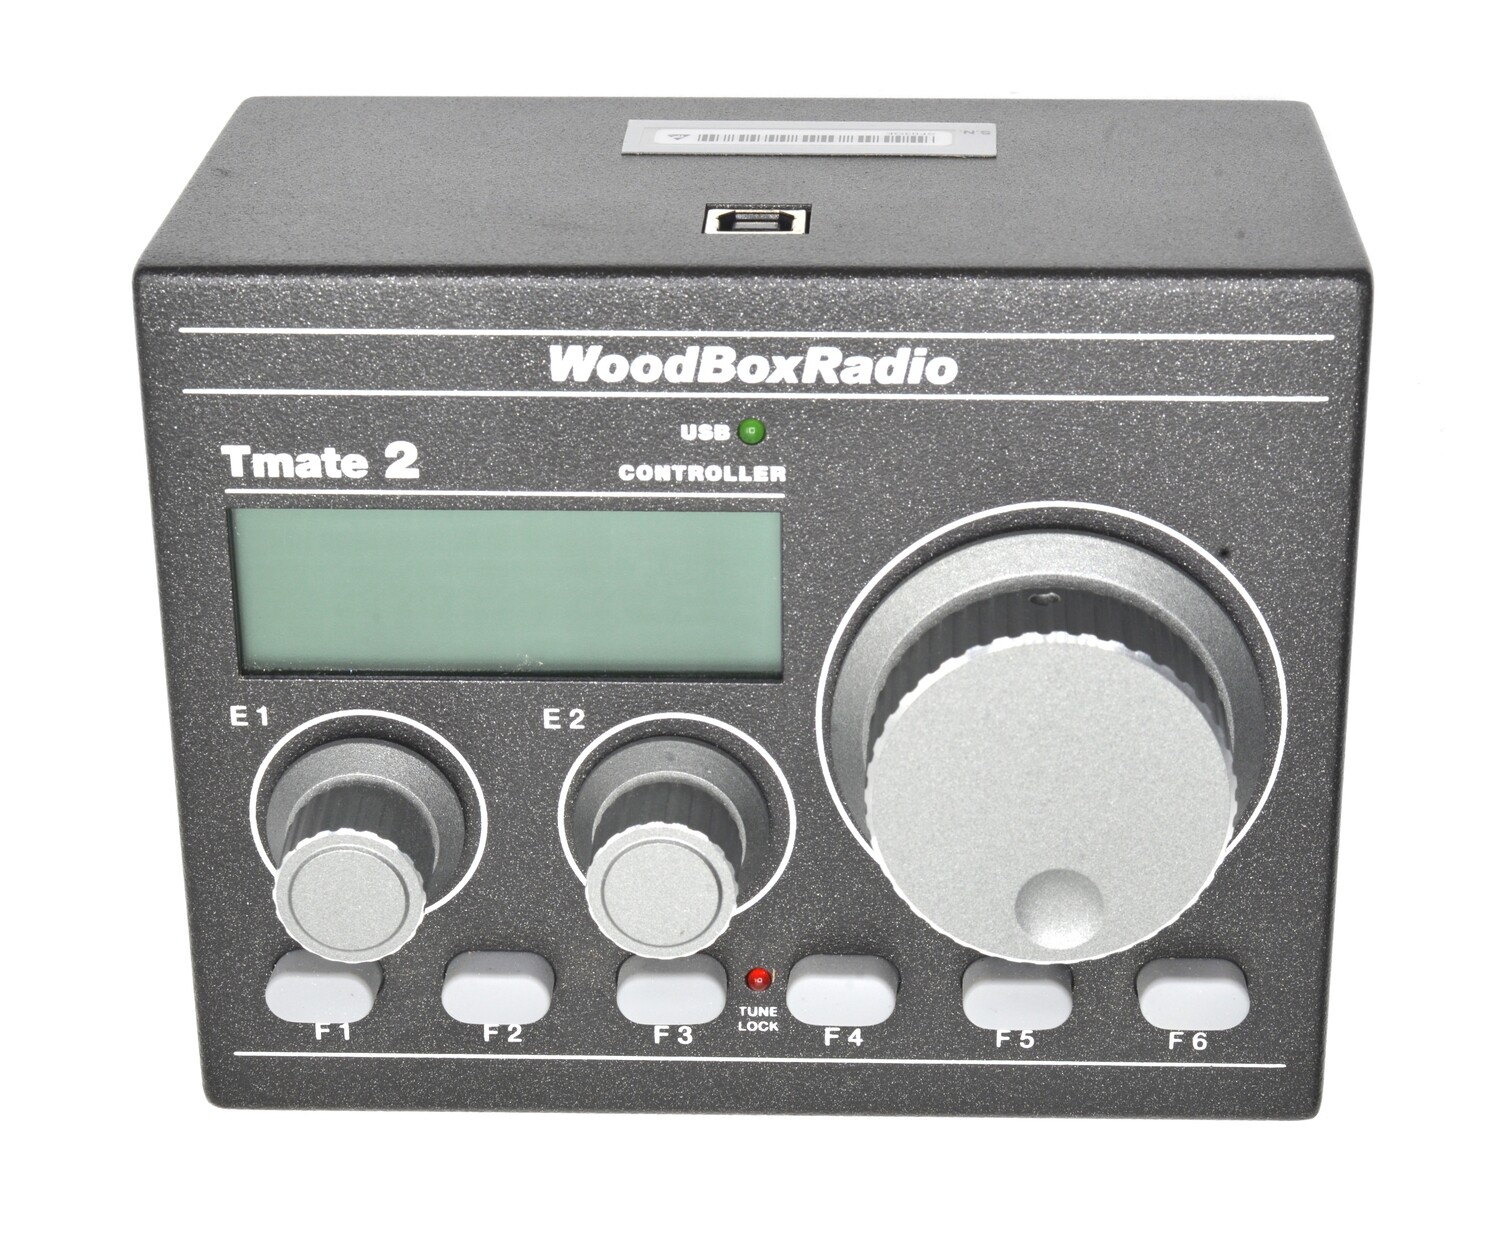 TMATE-2 Console for SDR Radio ex Demo Refurbished WoodBoxRadio Branded